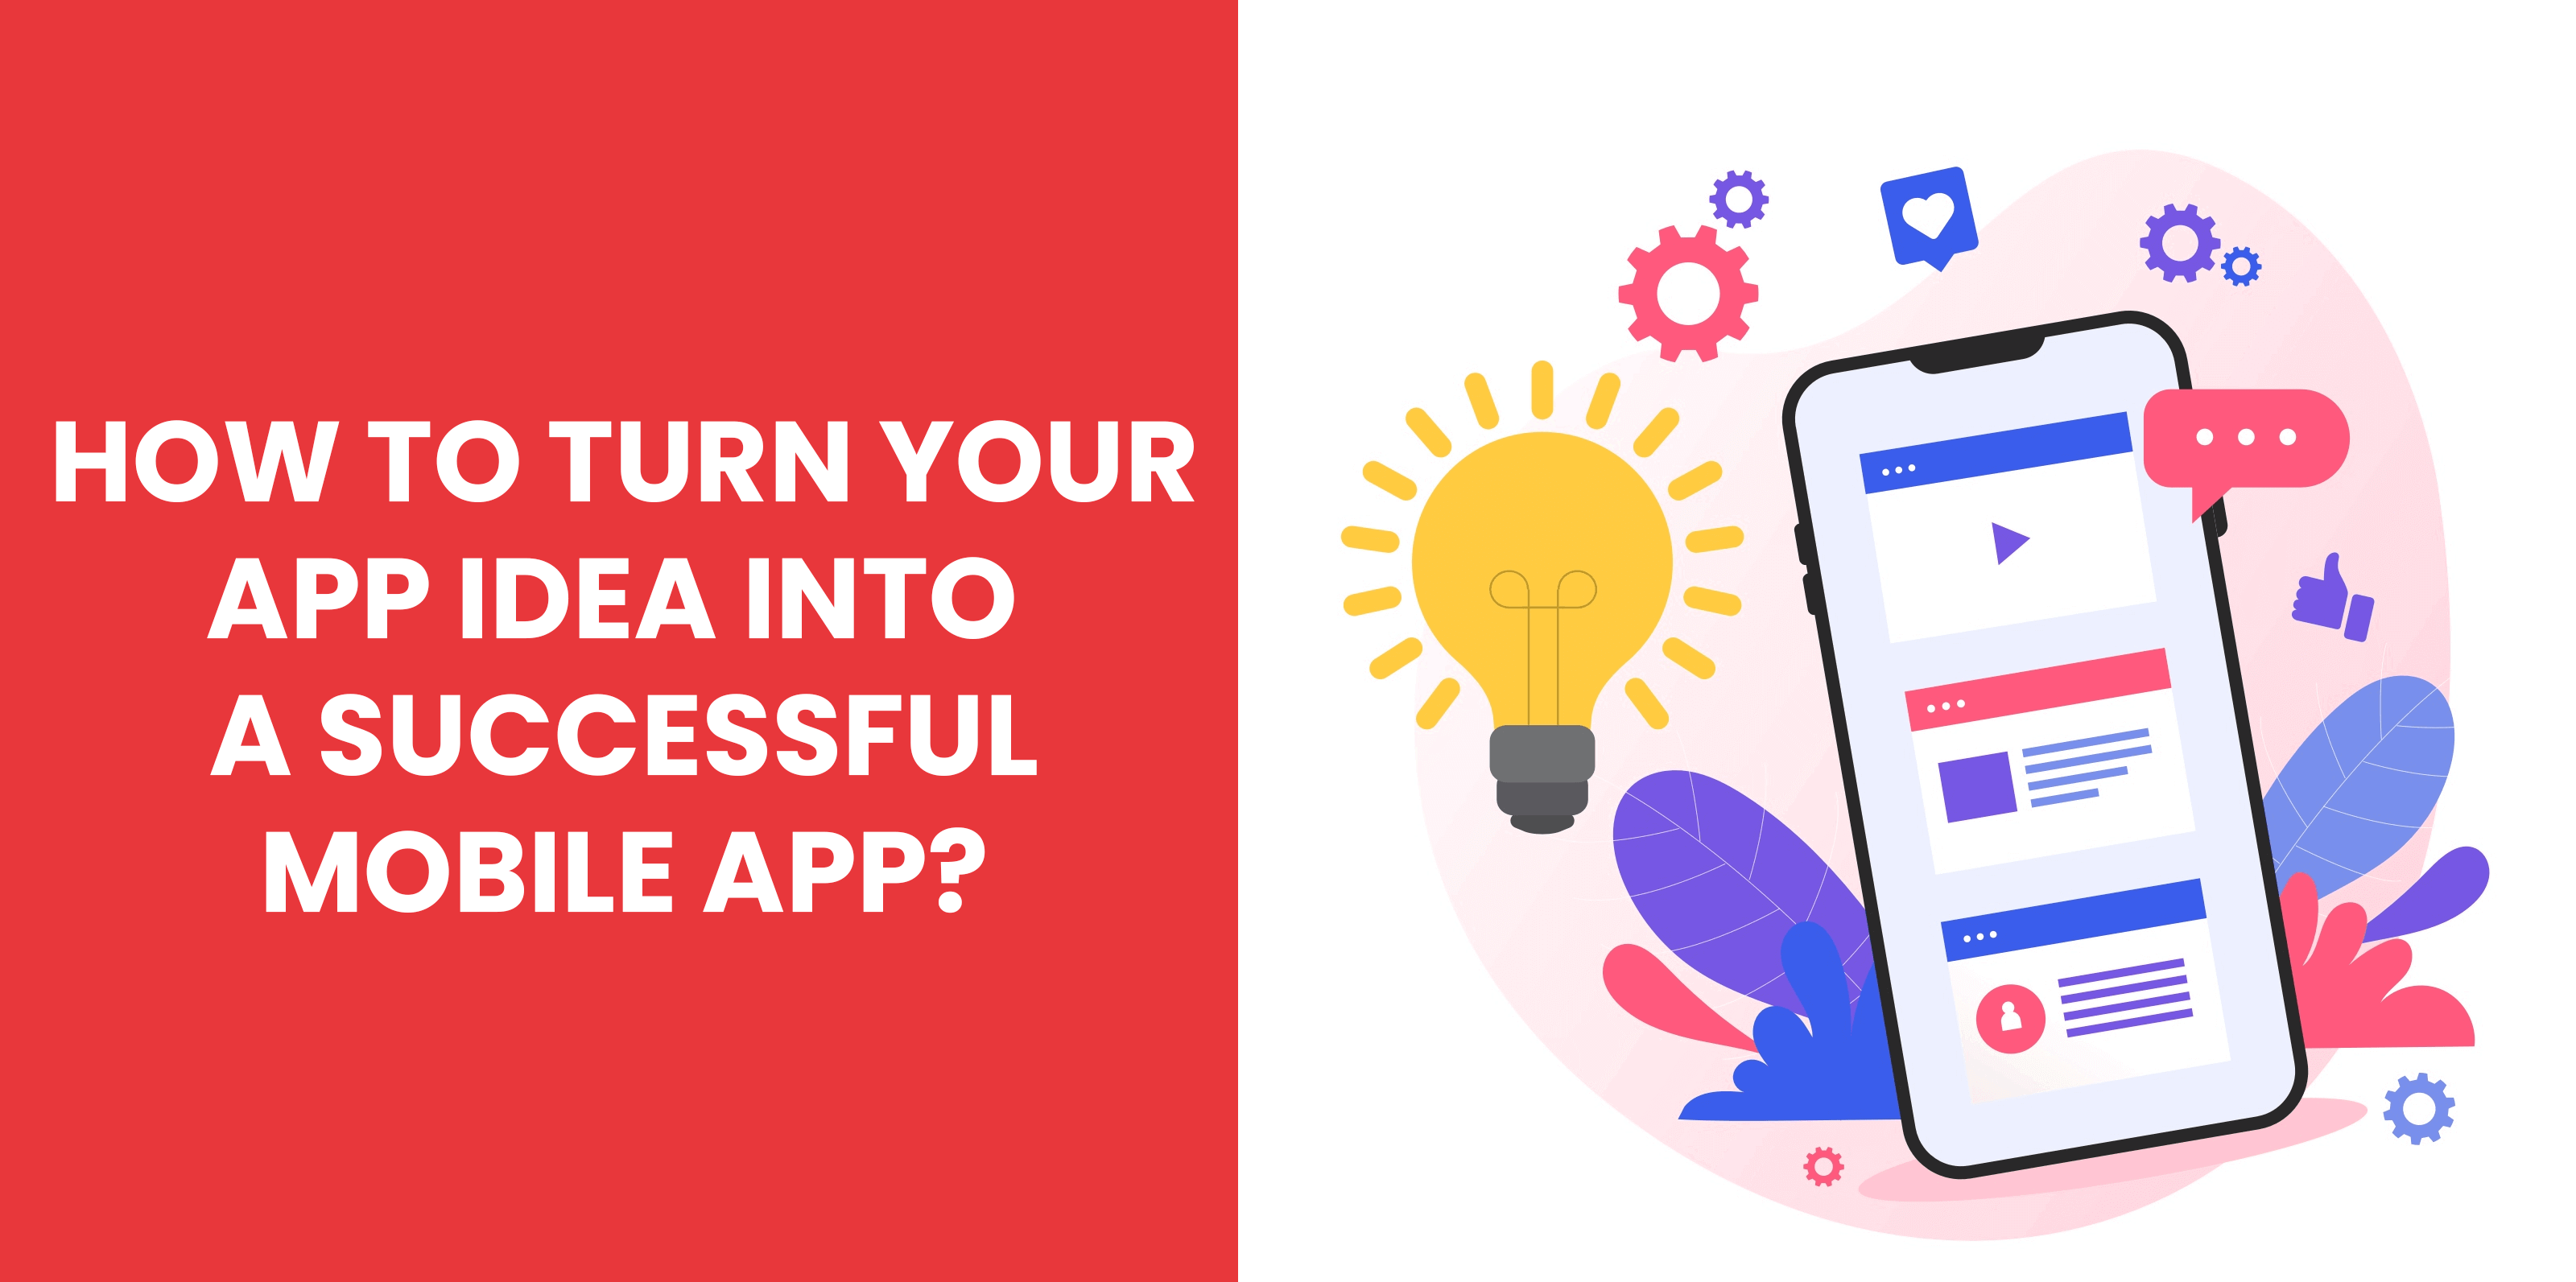 How-to-Turn-your-App-Idea-into-a-Successful-Mobile-App-ae